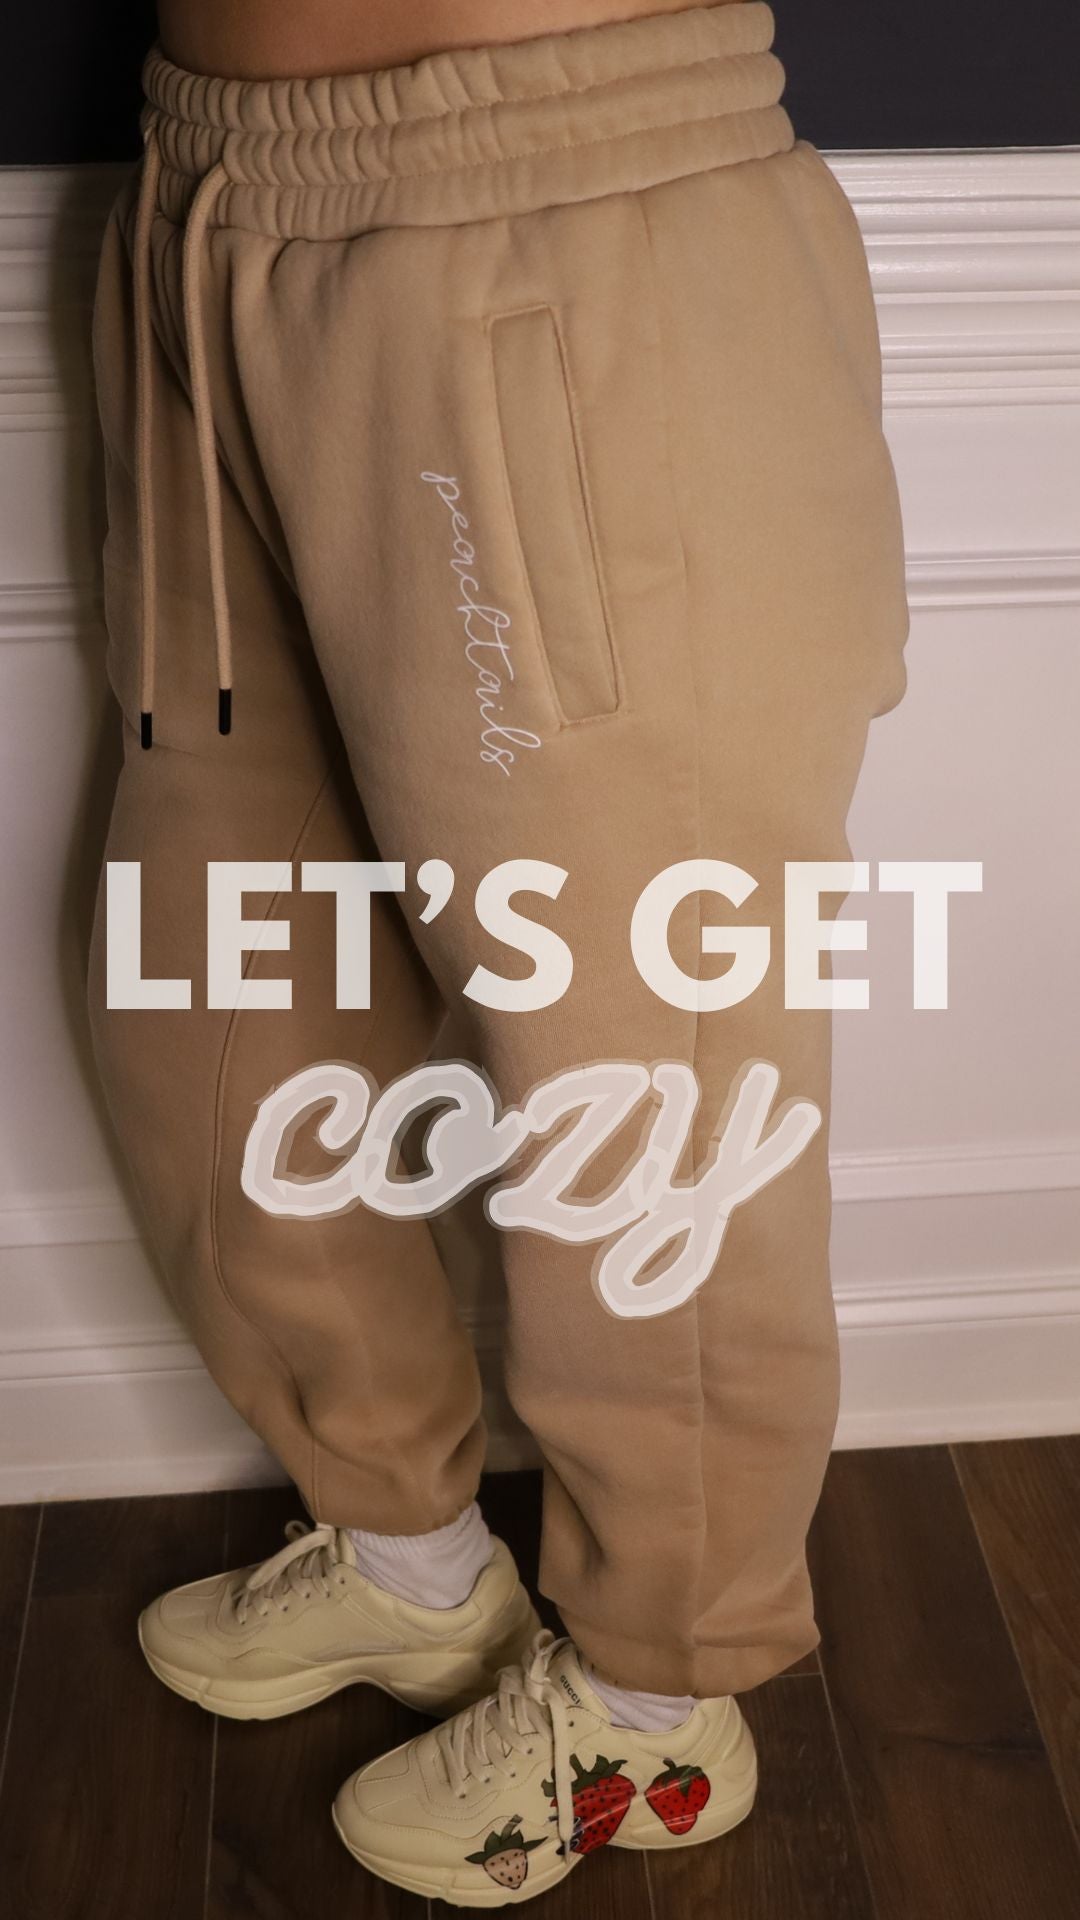 The image shows a close-up of someone wearing beige, cozy joggers with the word "peachtails" embroidered on them. Below, the phrase "LET'S GET cozy" in white cursive lettering overlays the image. The person is also wearing cream-colored sneakers with a red heart design. The focus on the soft joggers and comfortable footwear emphasizes a relaxed and comfortable style, inviting the viewer to enjoy a cozy experience.